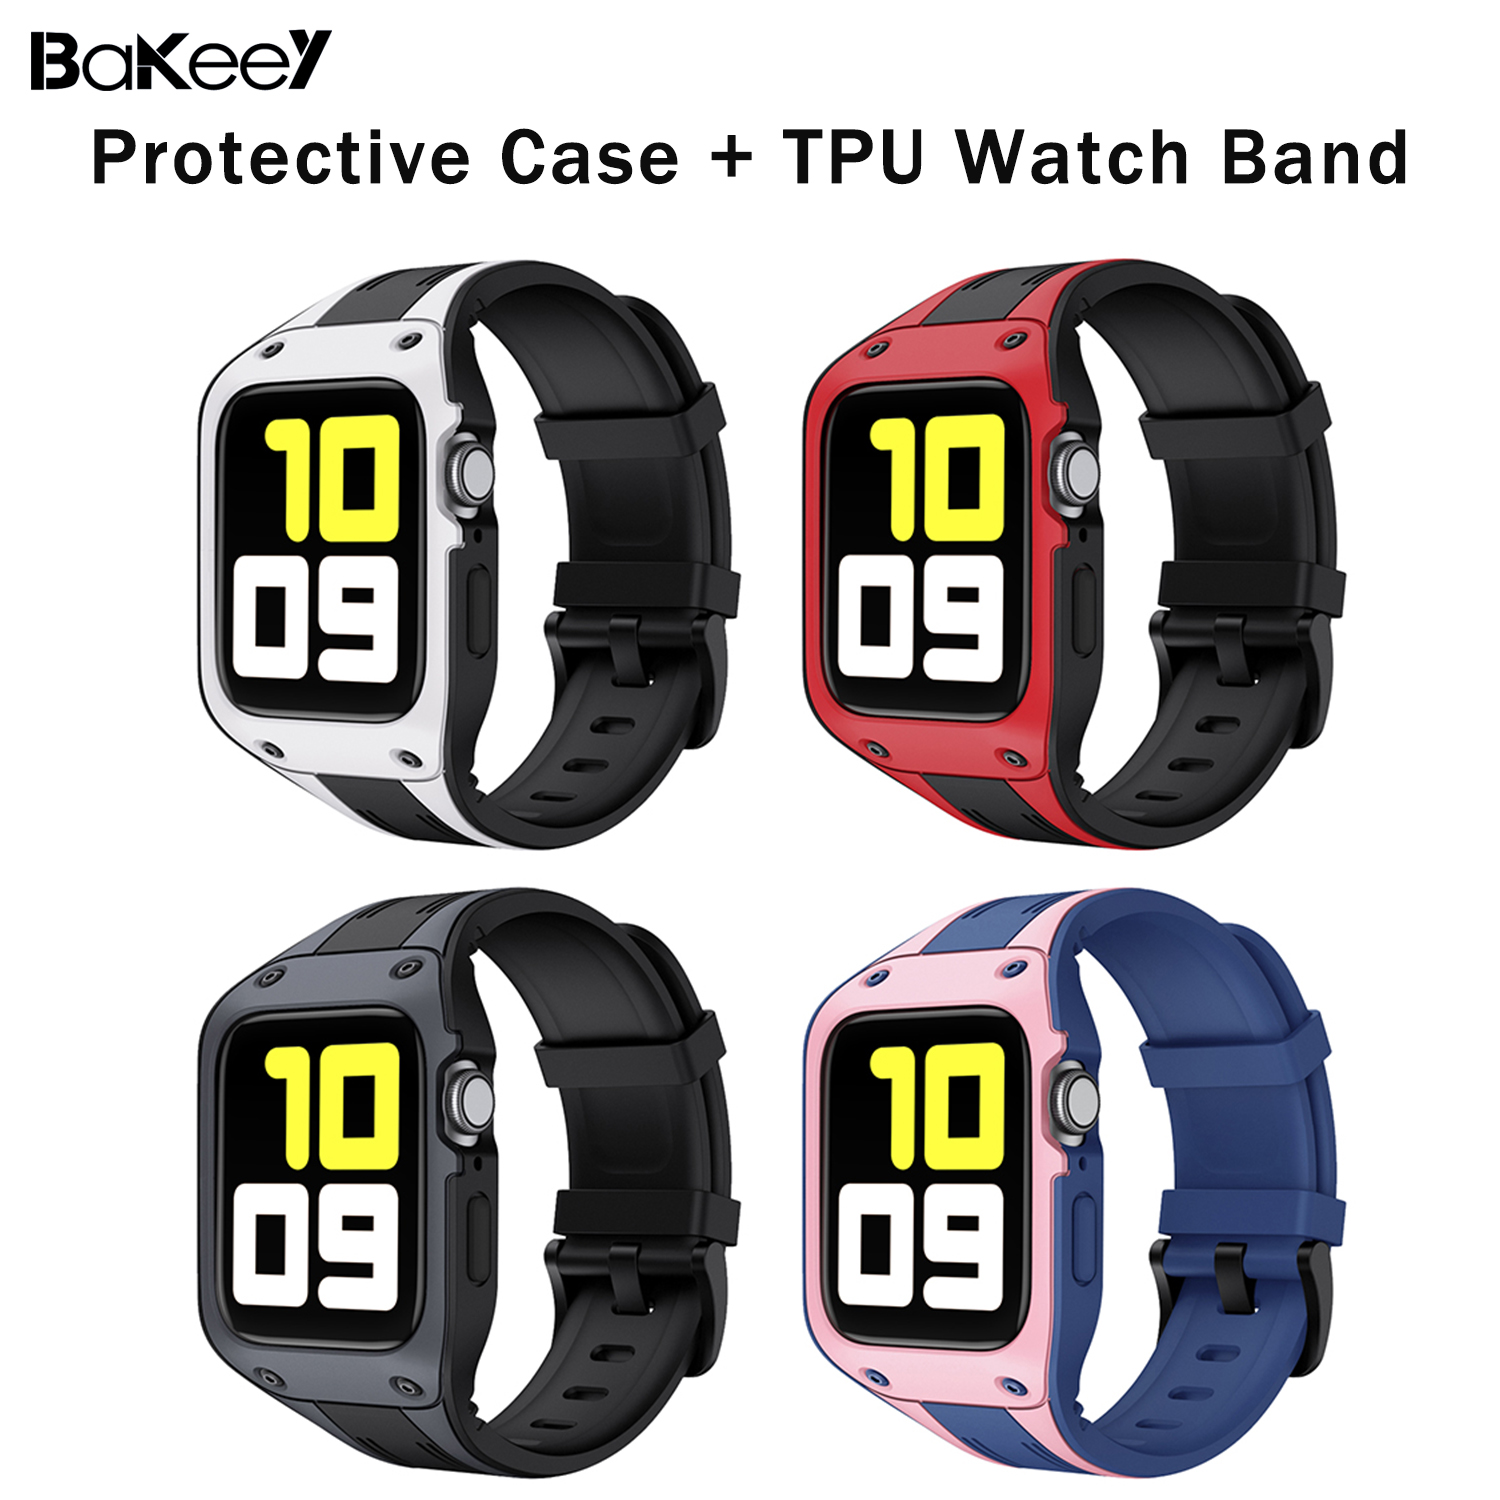 Bakeey-2-in-1-Sport-Casual-Shockproof-Protective-Case-with-TPU-Watch-Band-Strap-Replacement-for-Appl-1731527-1